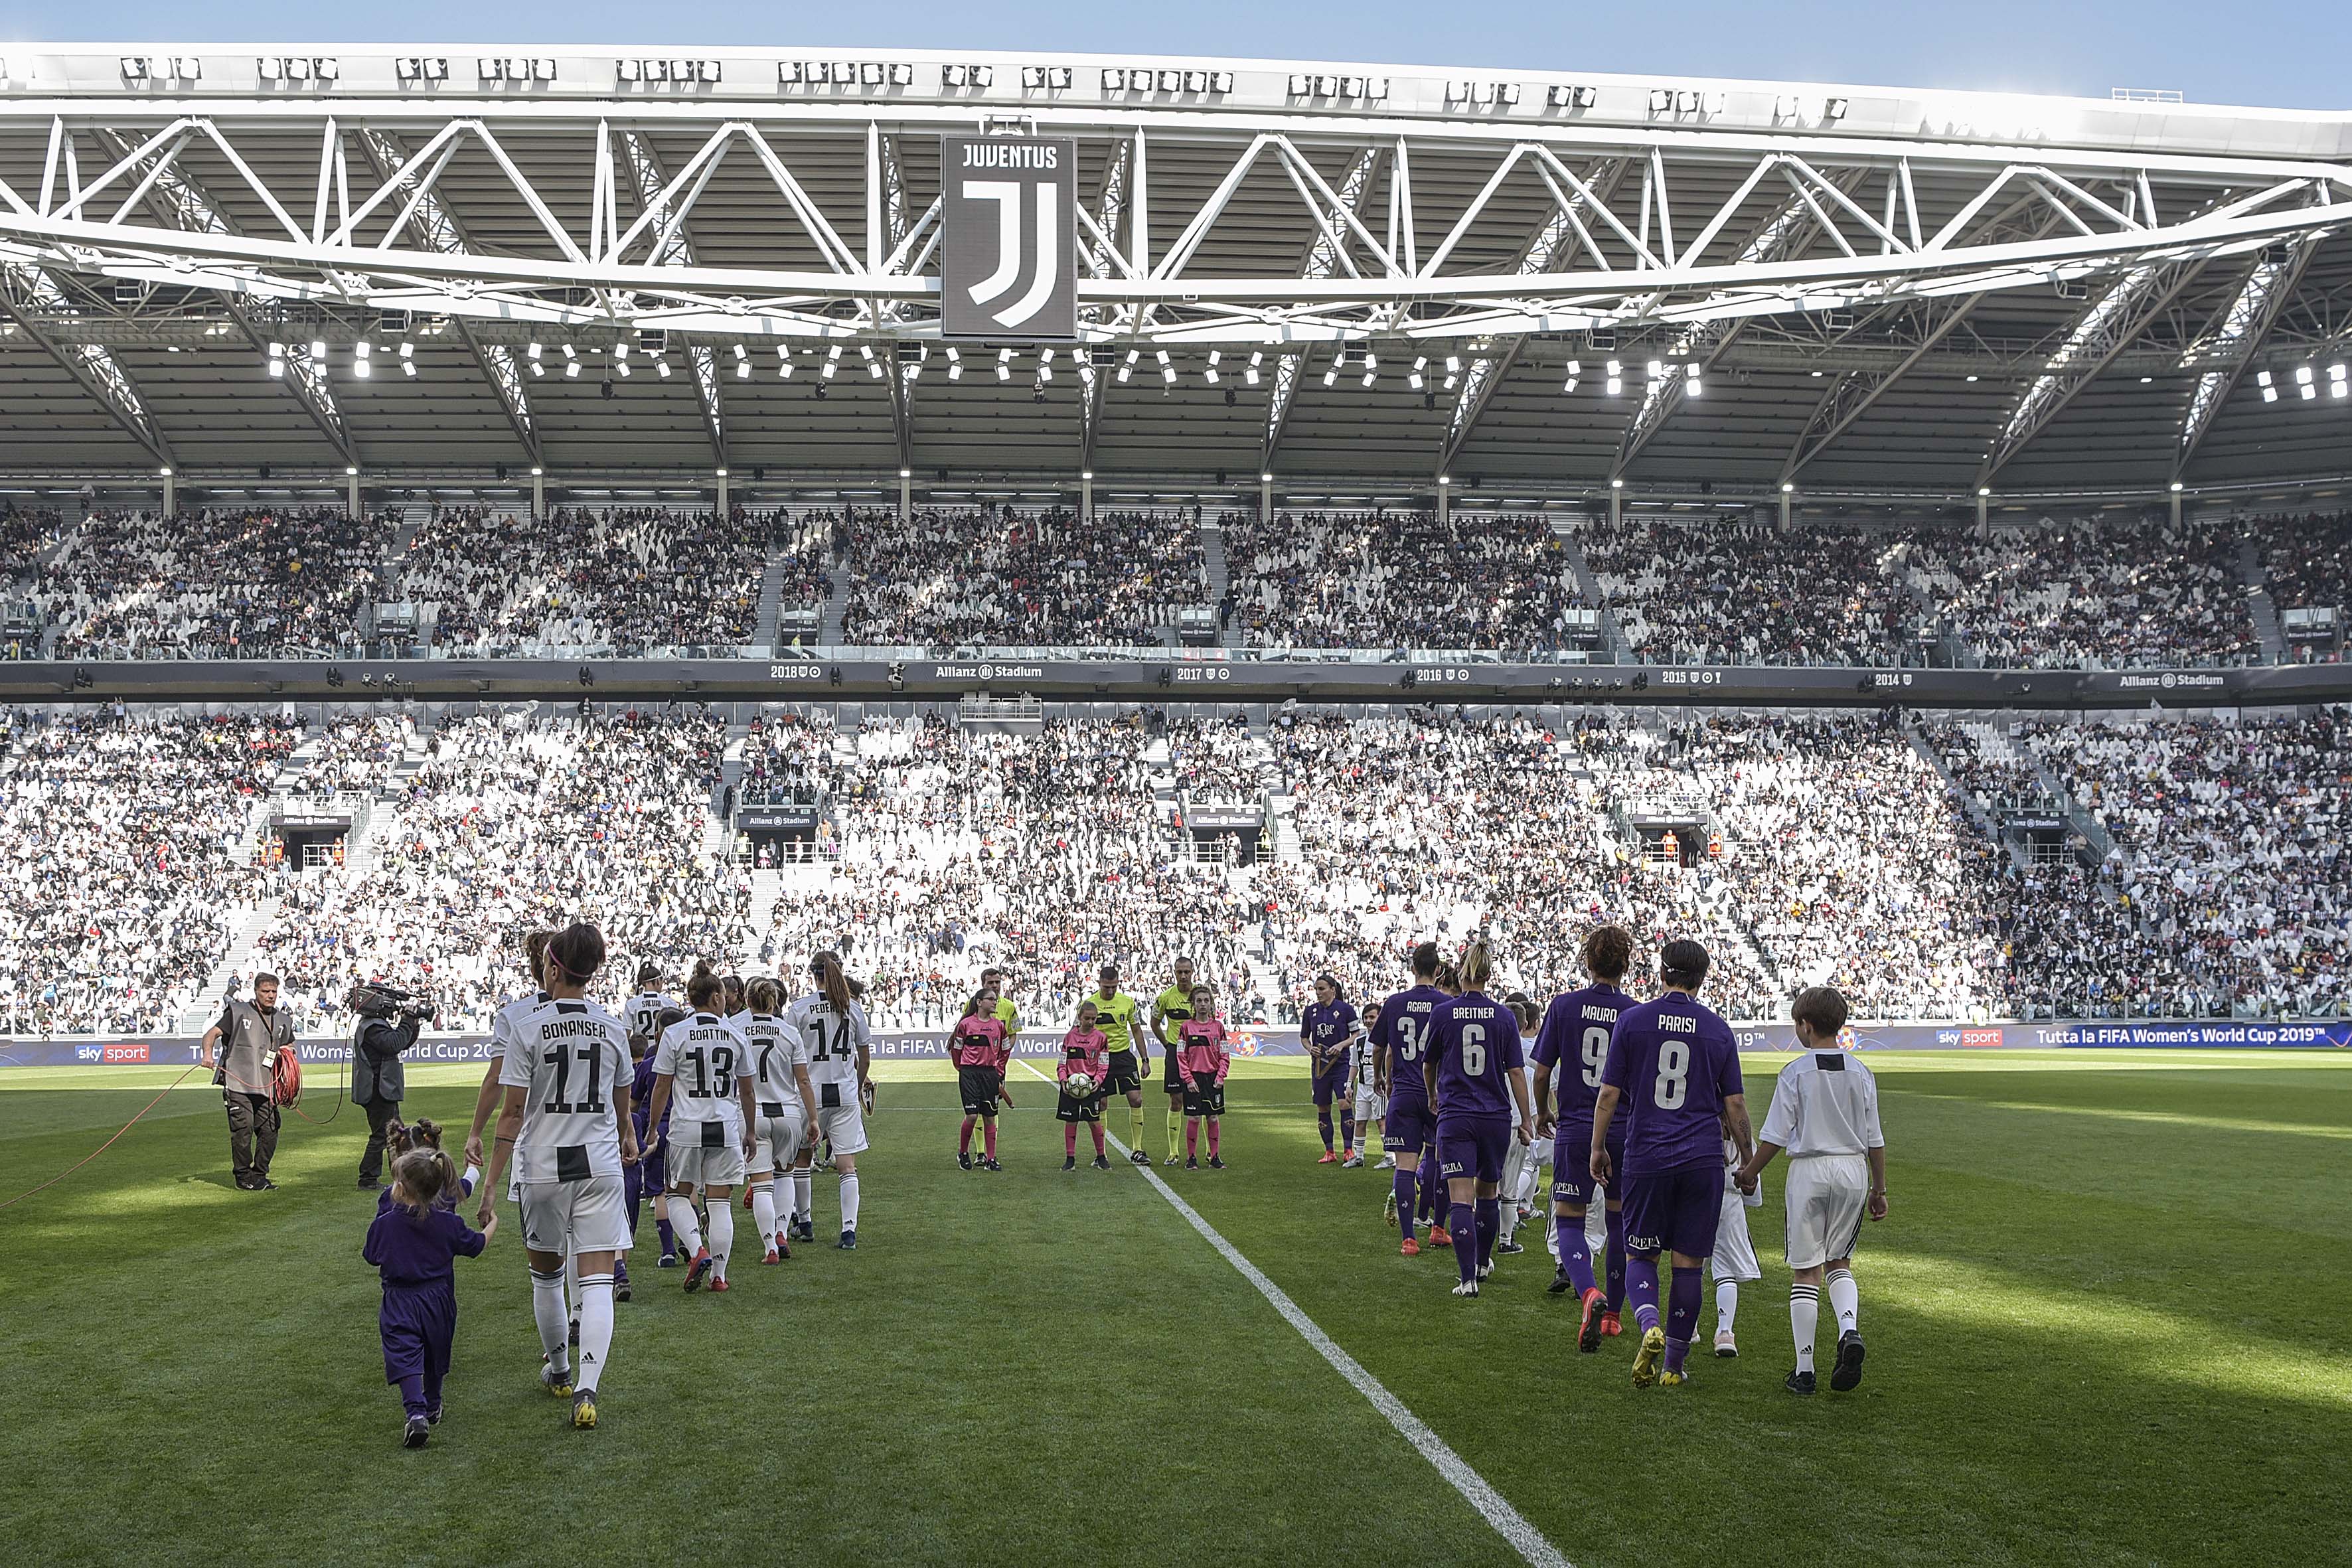 TURIN, ITALY - MARCH 24: team entrance during the Women Serie A match between Juventus and ACF Fiorentina at Allianz Stadium on March 24, 2019 in Turin, Italy.  (Photo by Daniele Badolato - Juventus FC/Juventus FC via Getty Images)